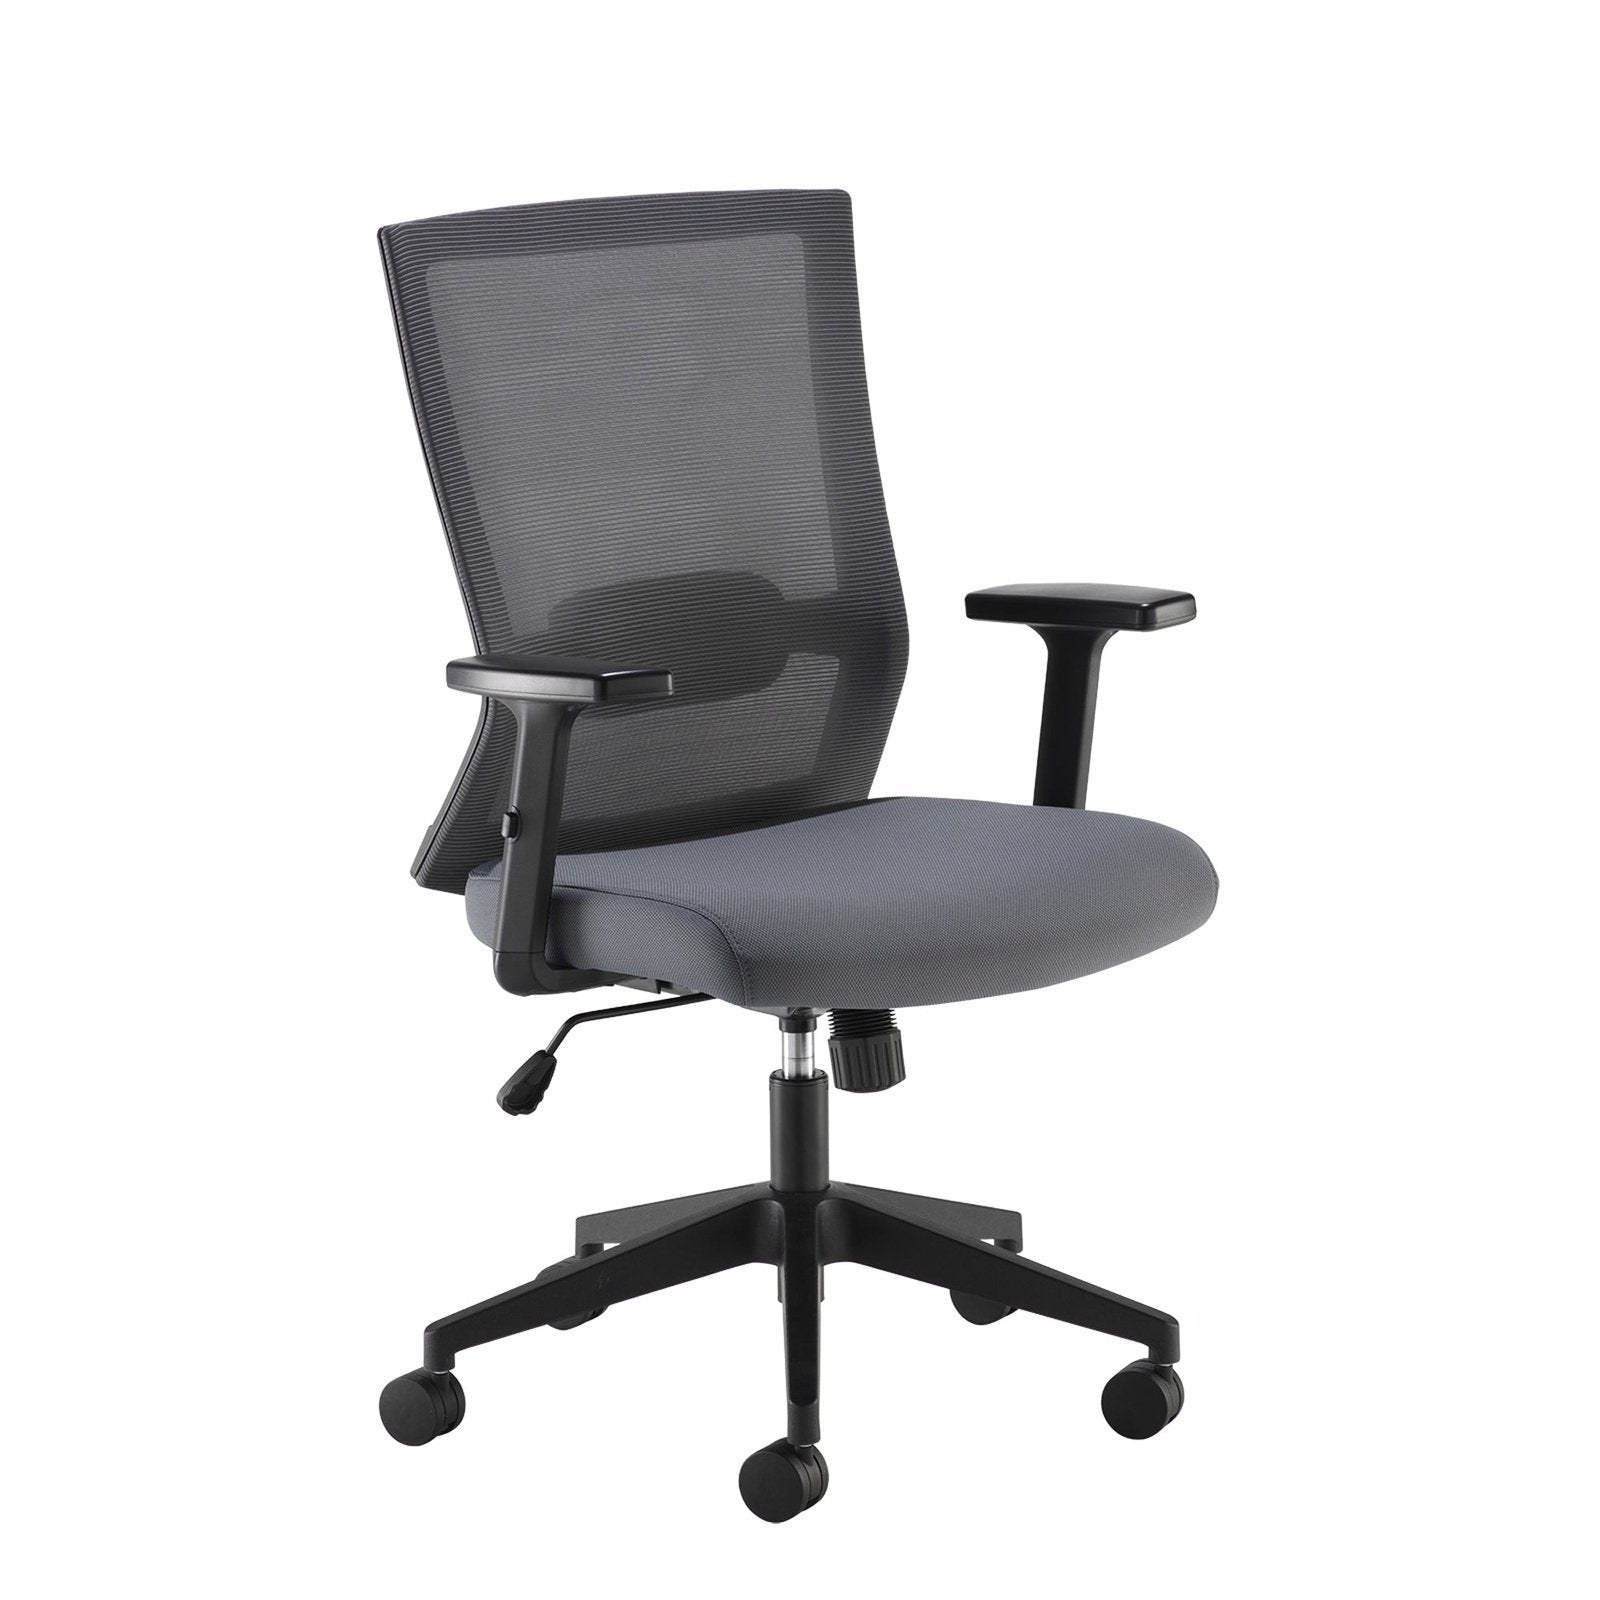 Travis mesh back operator chair with grey fabric seat and black base - Office Products Online